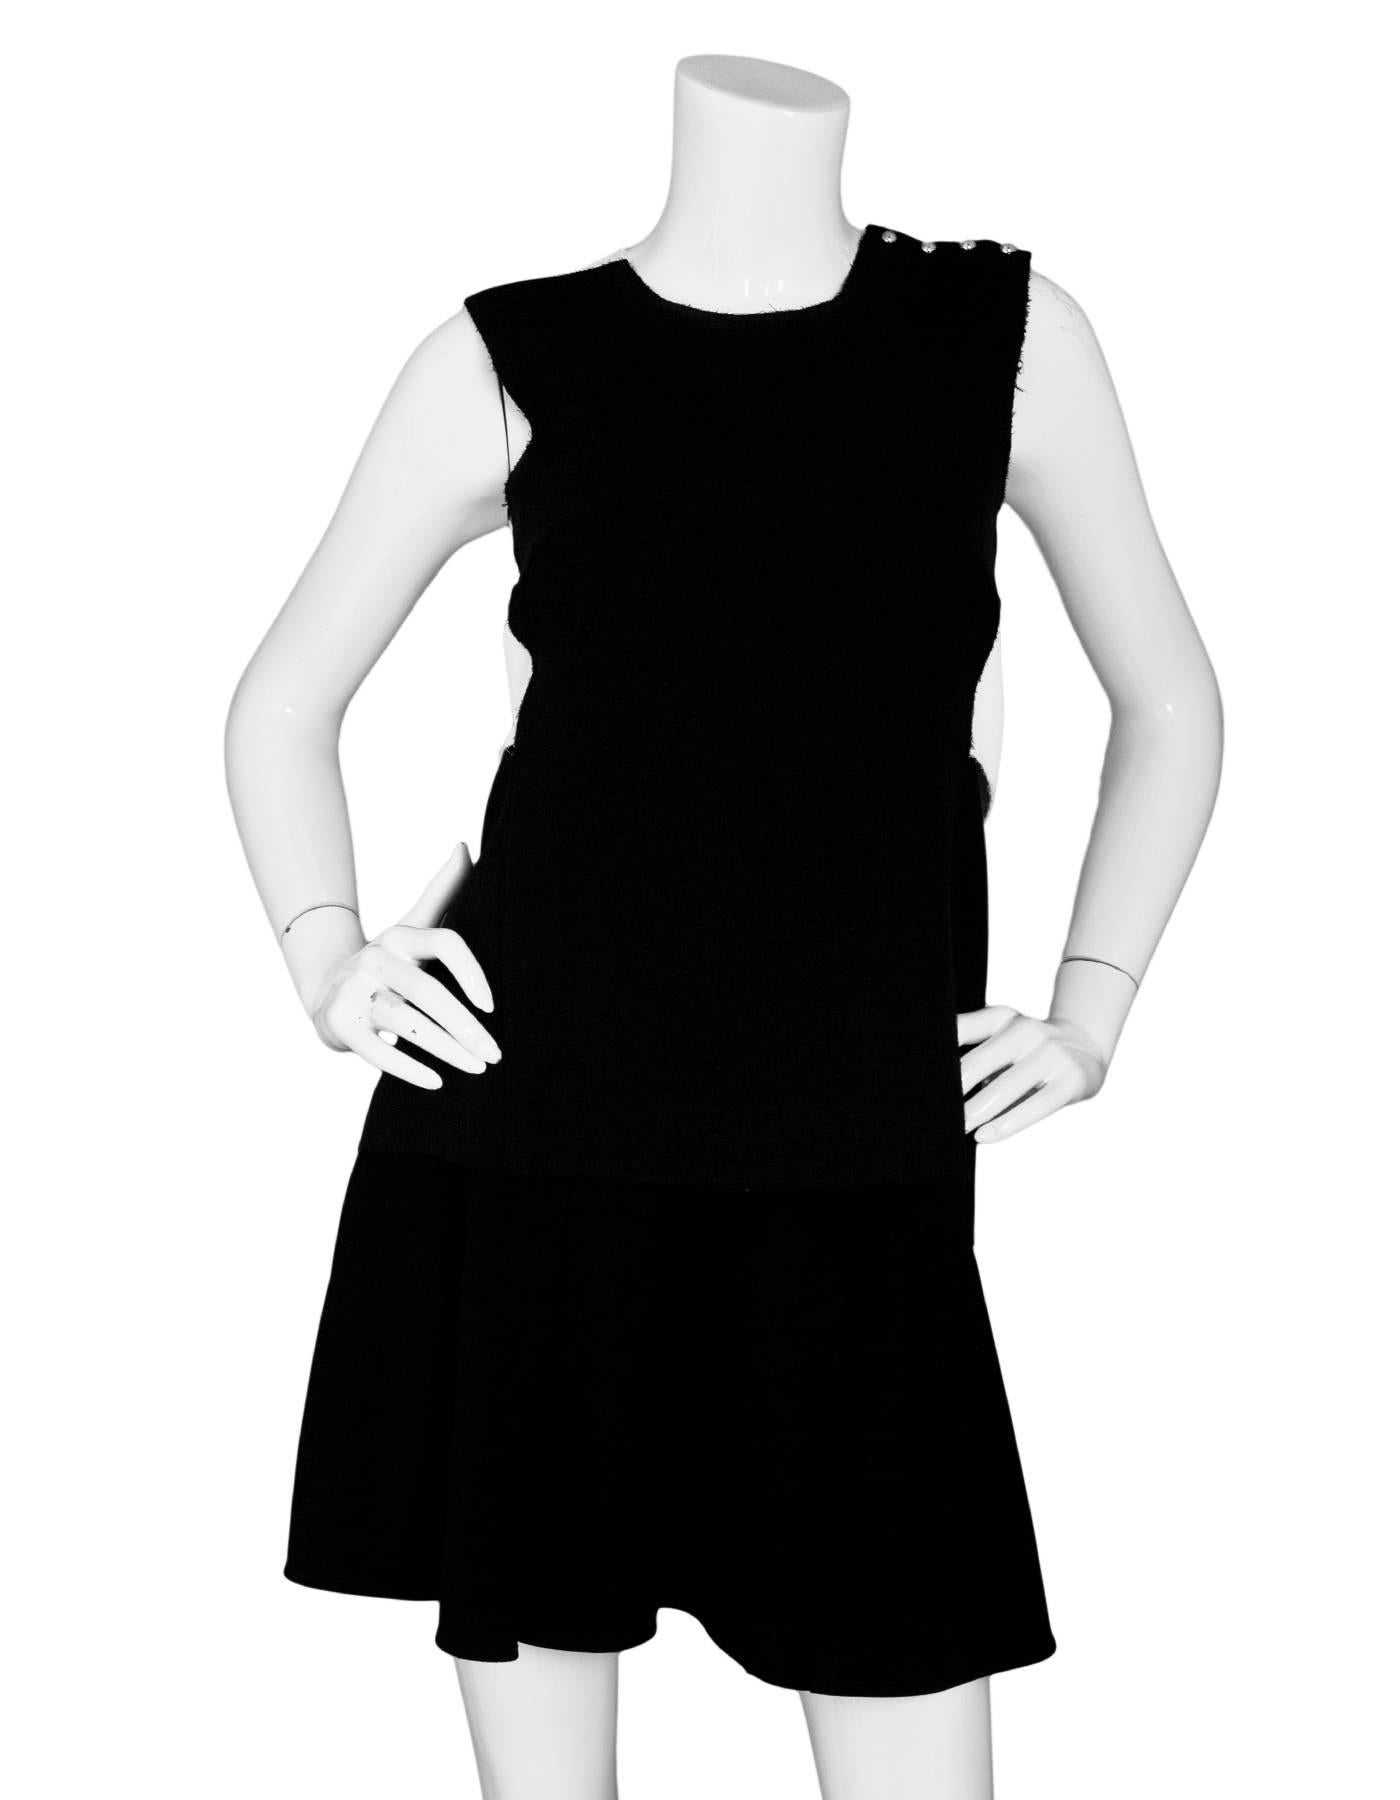 Derek Lam 10 Crosby Black & White Peplum Dress Sz 0

Features open back

Made In: China
Color: Black, white
Composition: 75% triacetate, 25% polyester
Closure/Opening: Button closure at shoulder
Overall Condition: Excellent pre-owned condition,